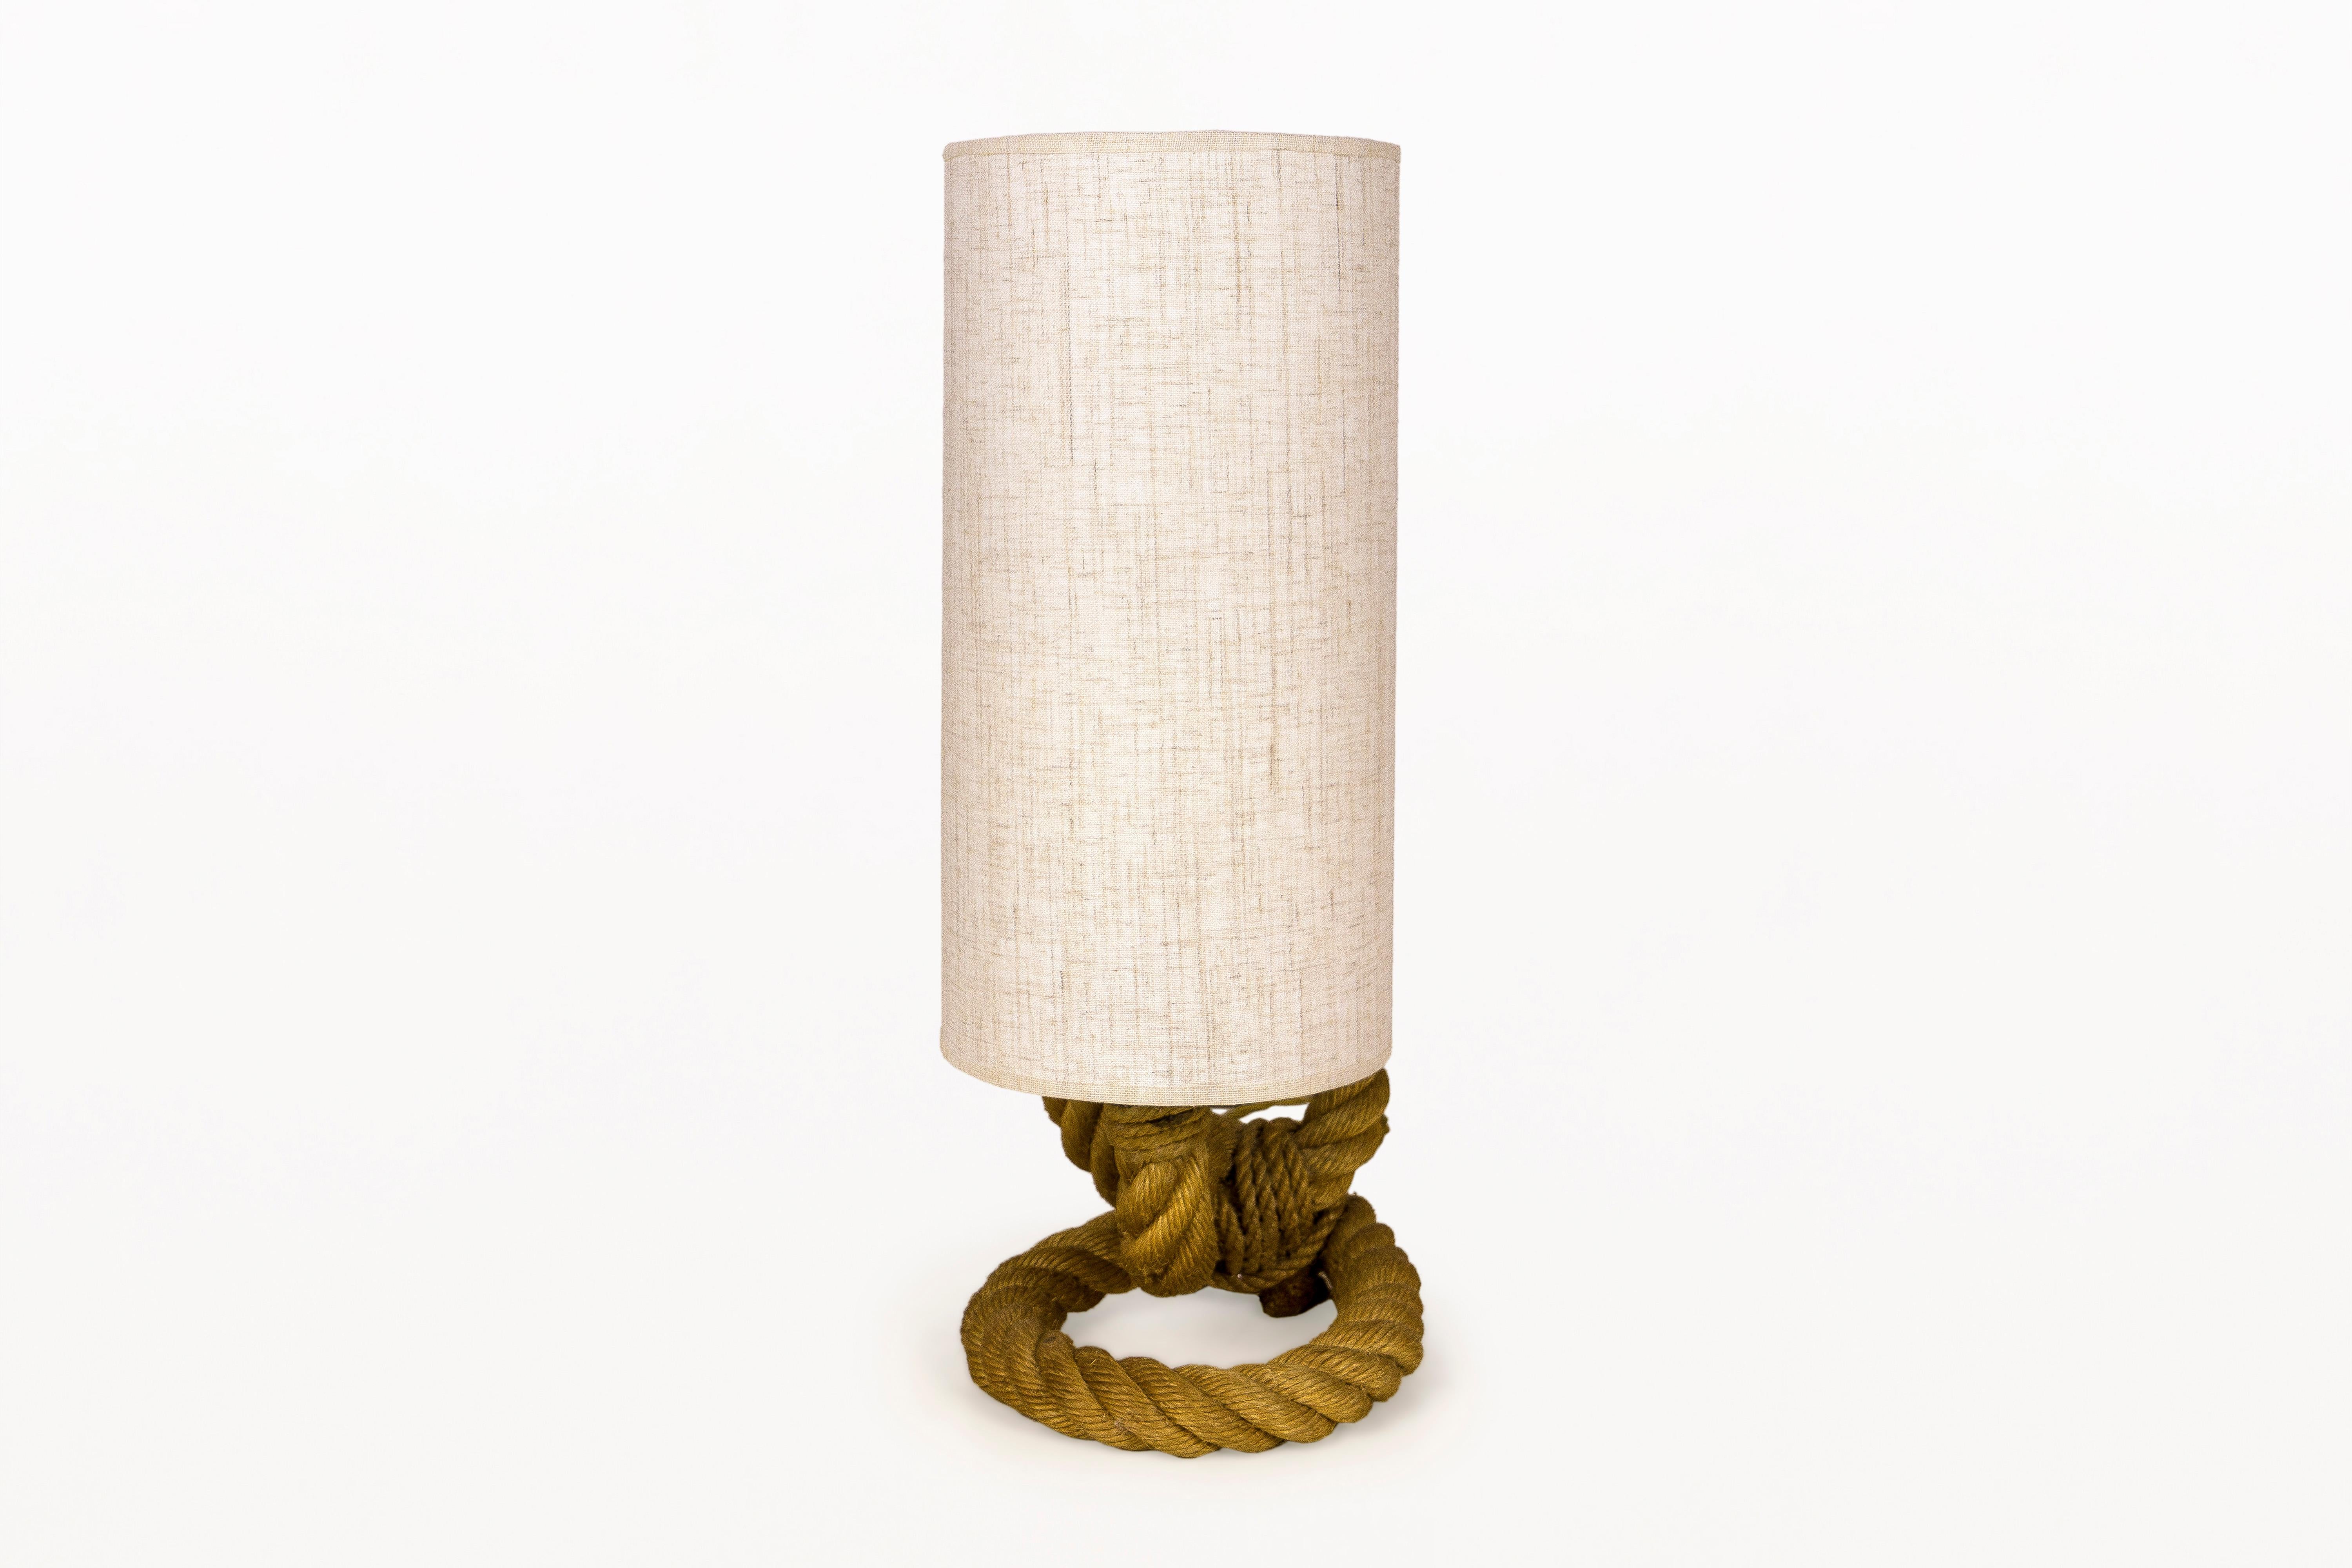 Adrien Audoux and Frida Minet table lamp.
Base made with rope.
Functional and stylish,
circa 1950, France.
Very good vintage condition.
Adrien Audoux and Frida Minet were a French couple and worked as designer. During the 1940s and the 1950s,